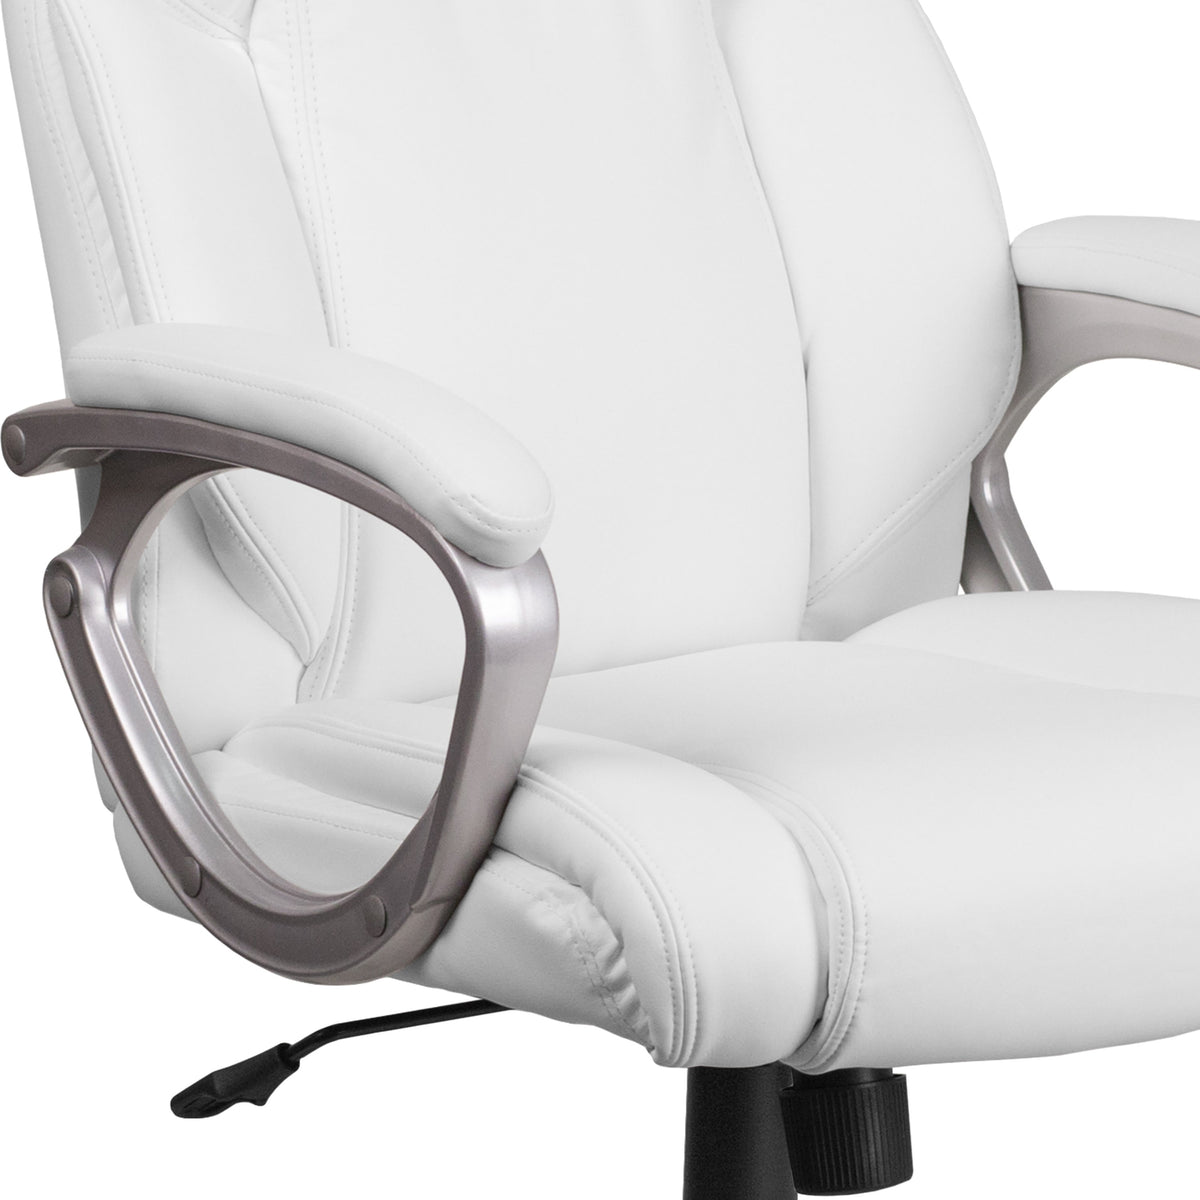 White |#| Mid-Back White LeatherSoft Executive Swivel Office Chair with Padded Arms